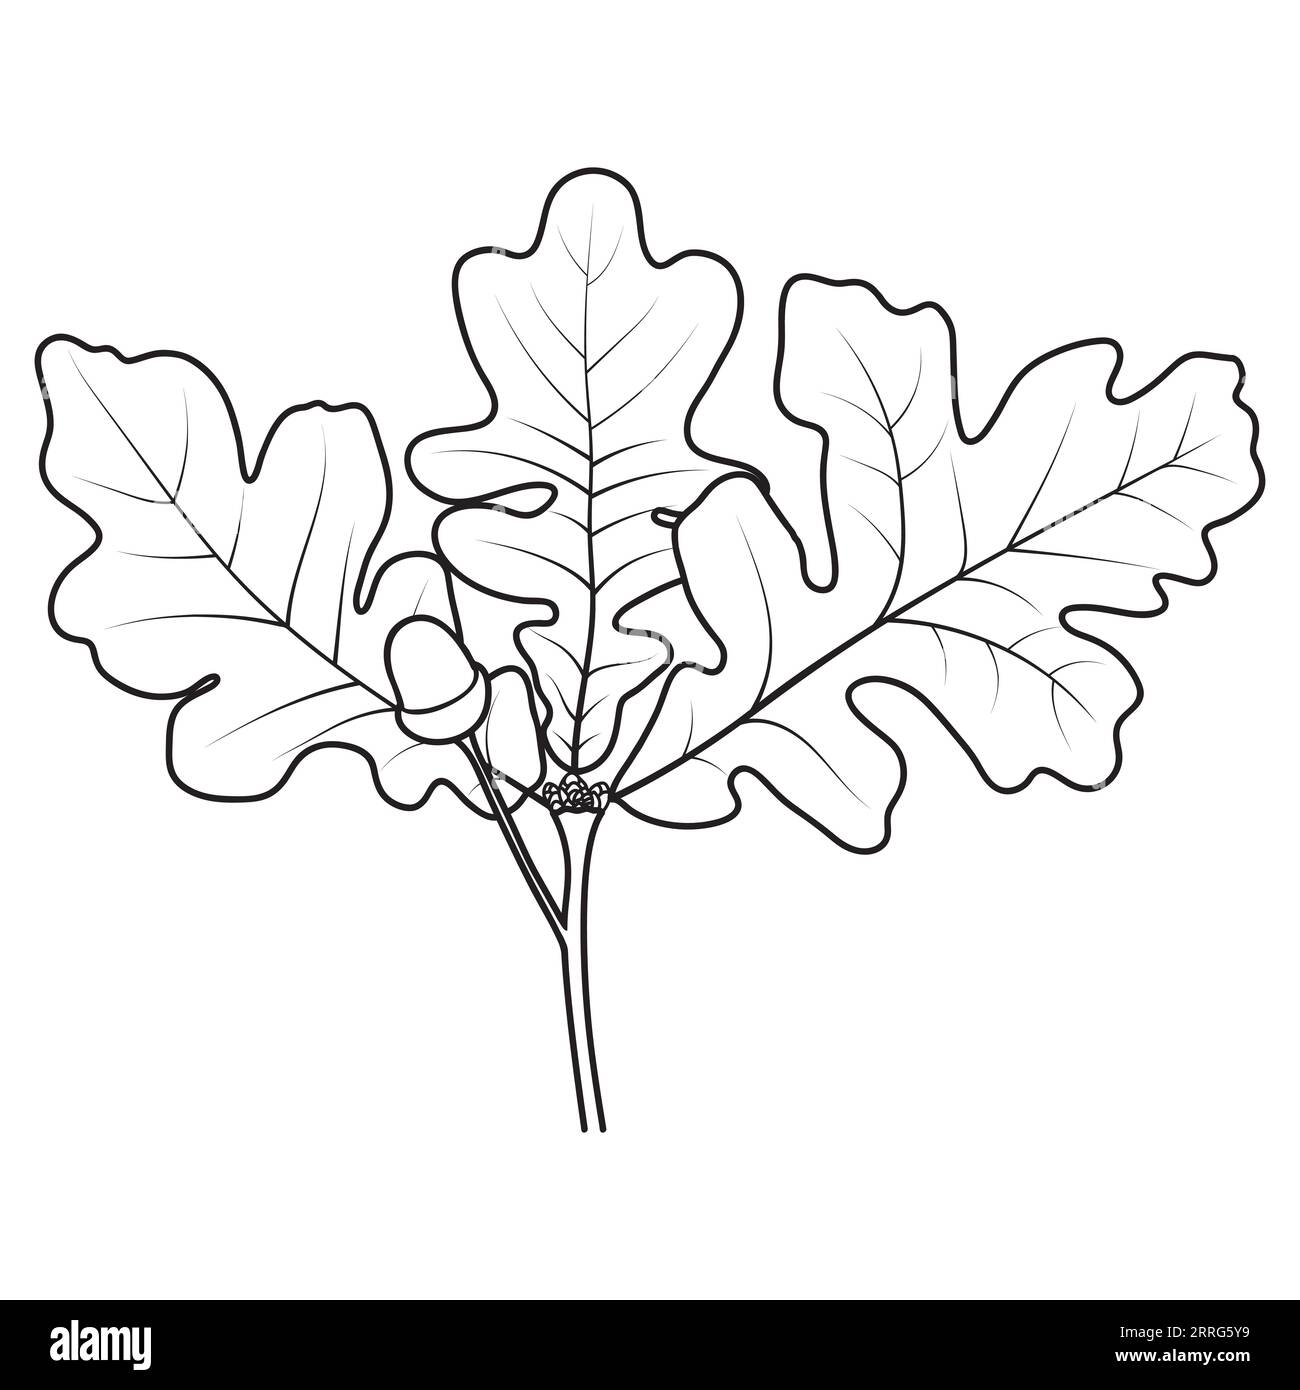 Oak tree twig with leaves and acorn, vector illustration. Coloring book page. Stock Vector